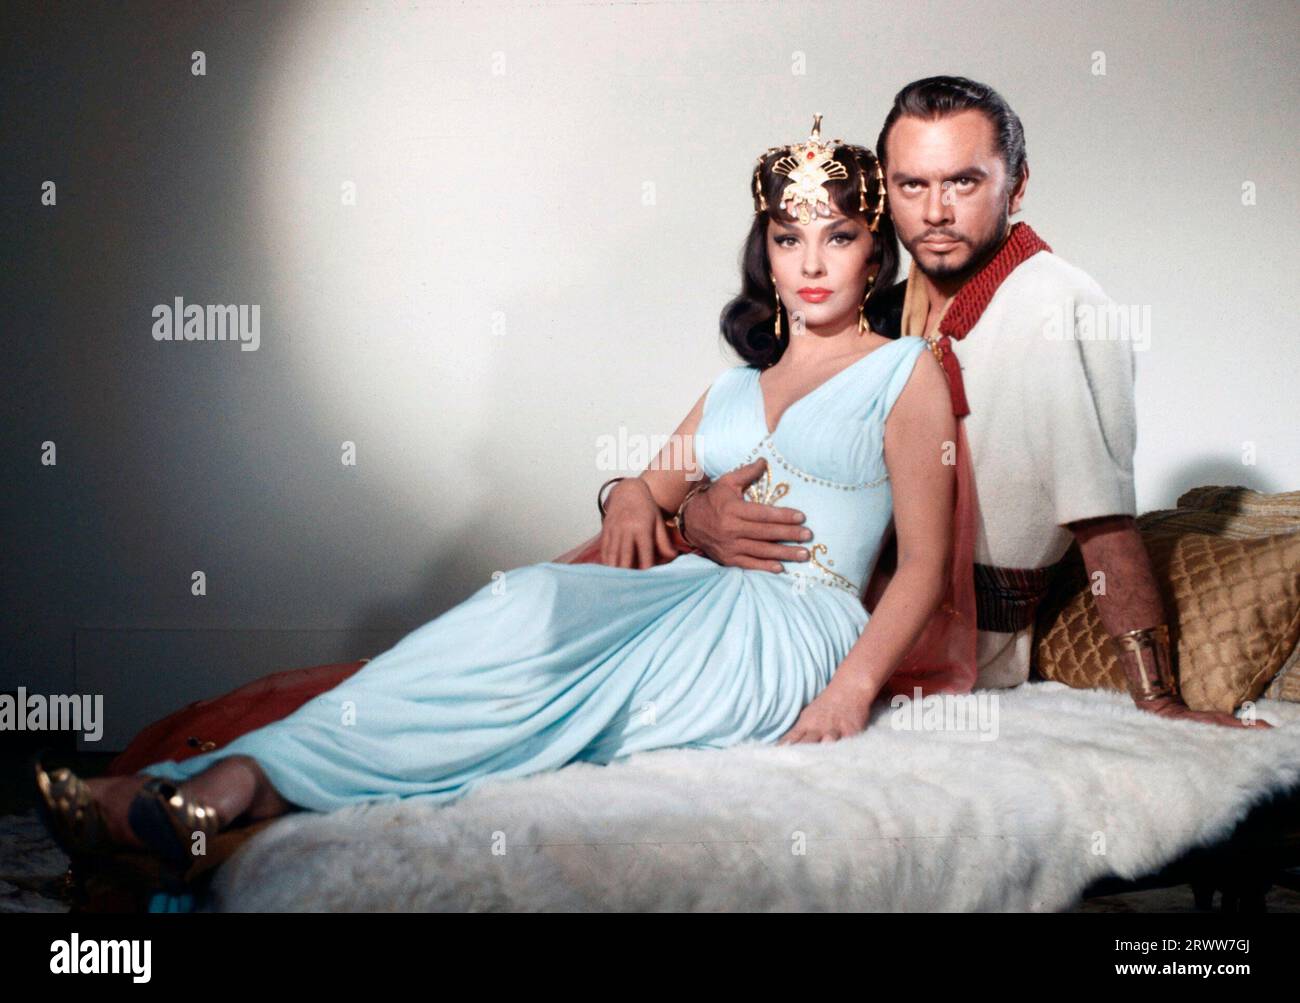 YUL BRYNNER and GINA LOLLOBRIGIDA in SOLOMON AND SHEBA (1959), directed by KING VIDOR. Credit: UNITED ARTISTS / Album Stock Photo